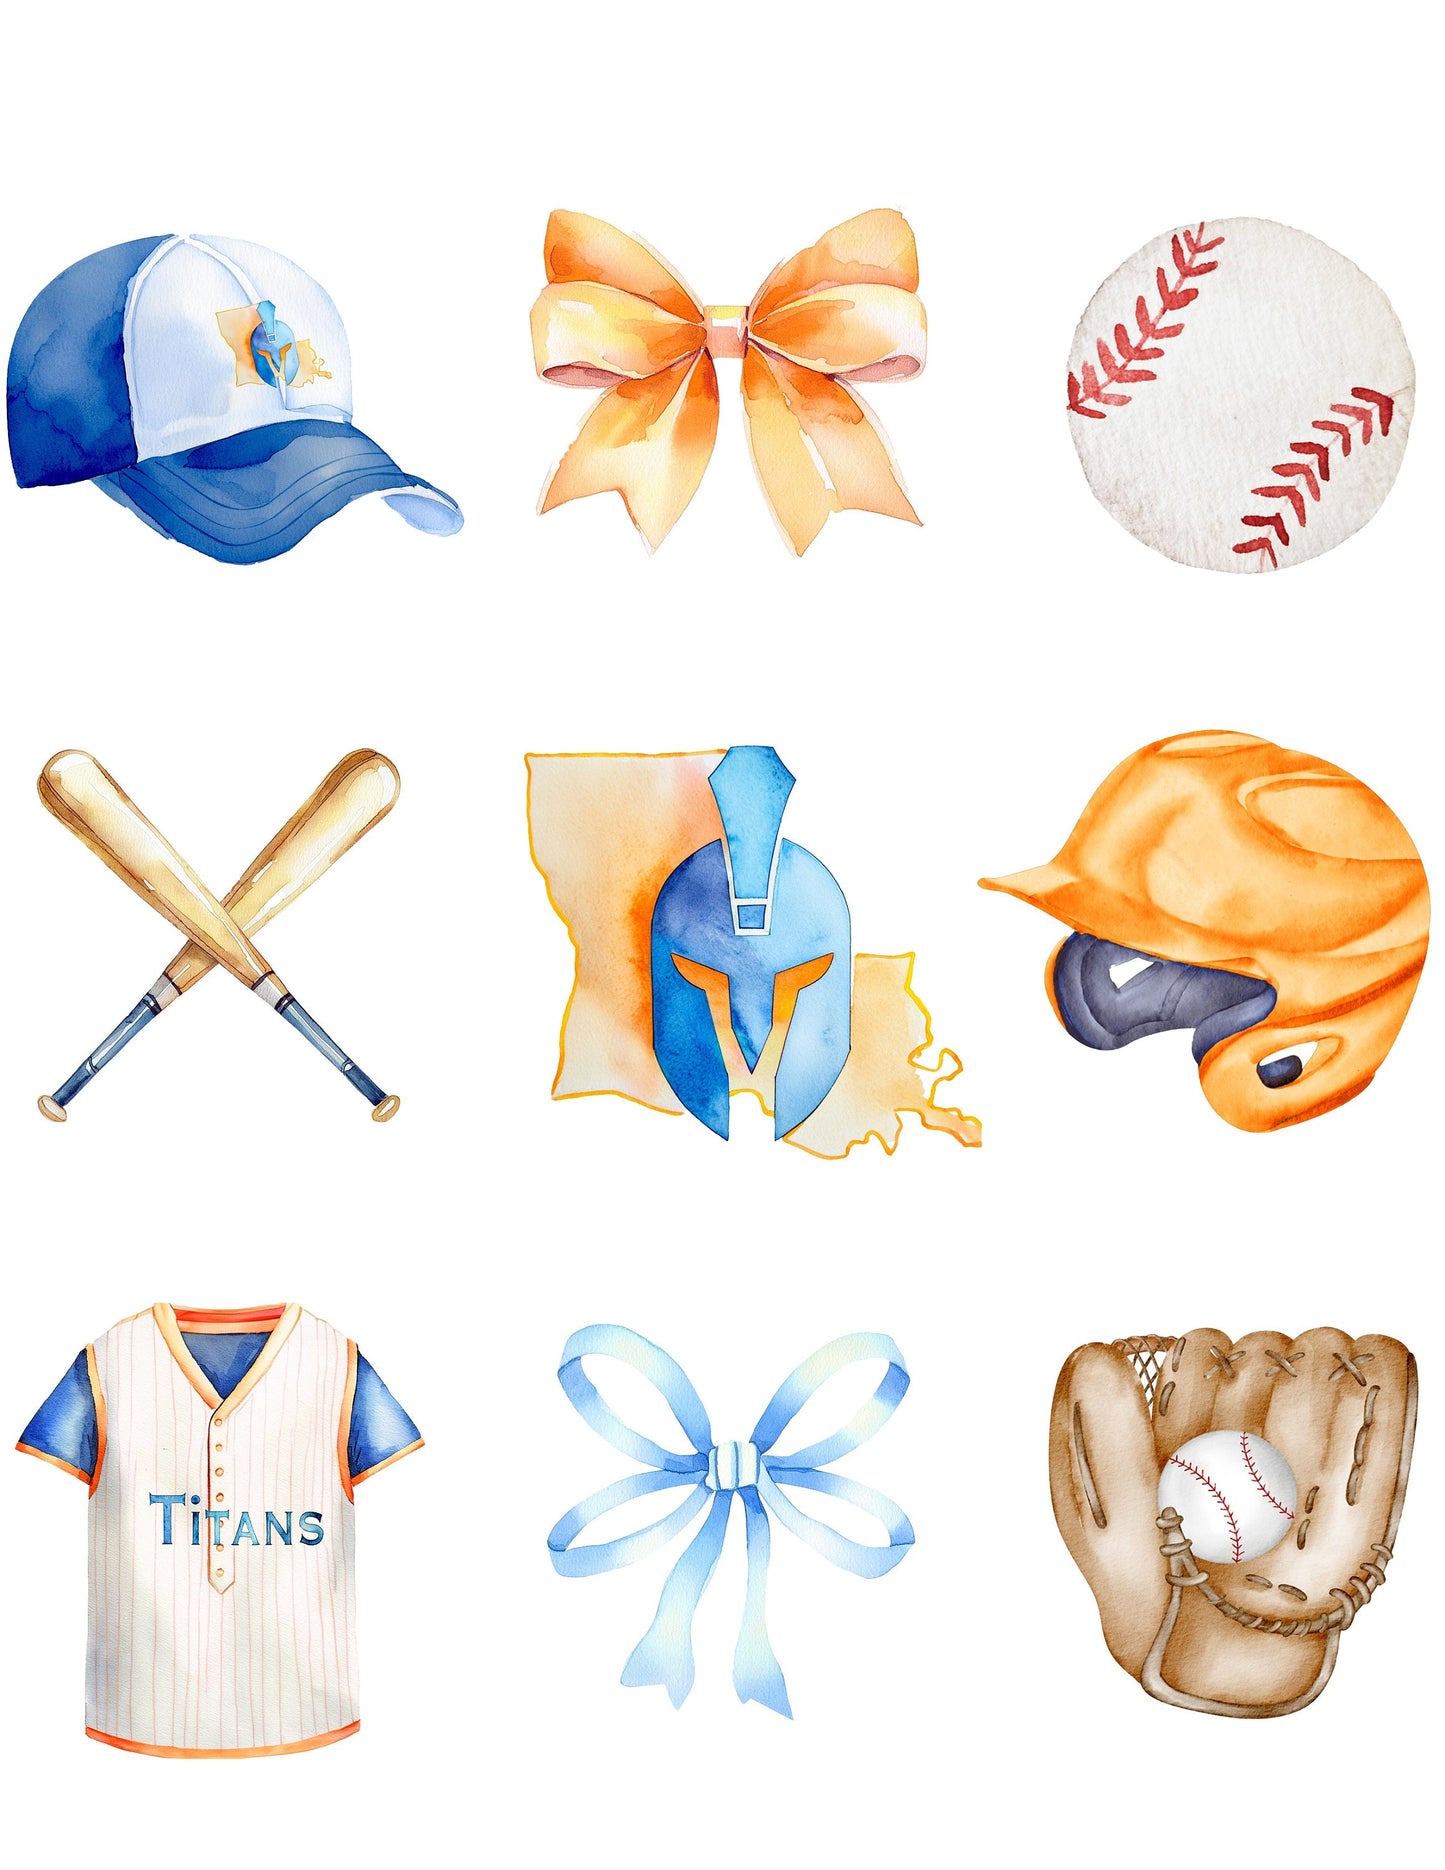 Girls Titans Baseball Watercolor Coquette Sublimated Shirt